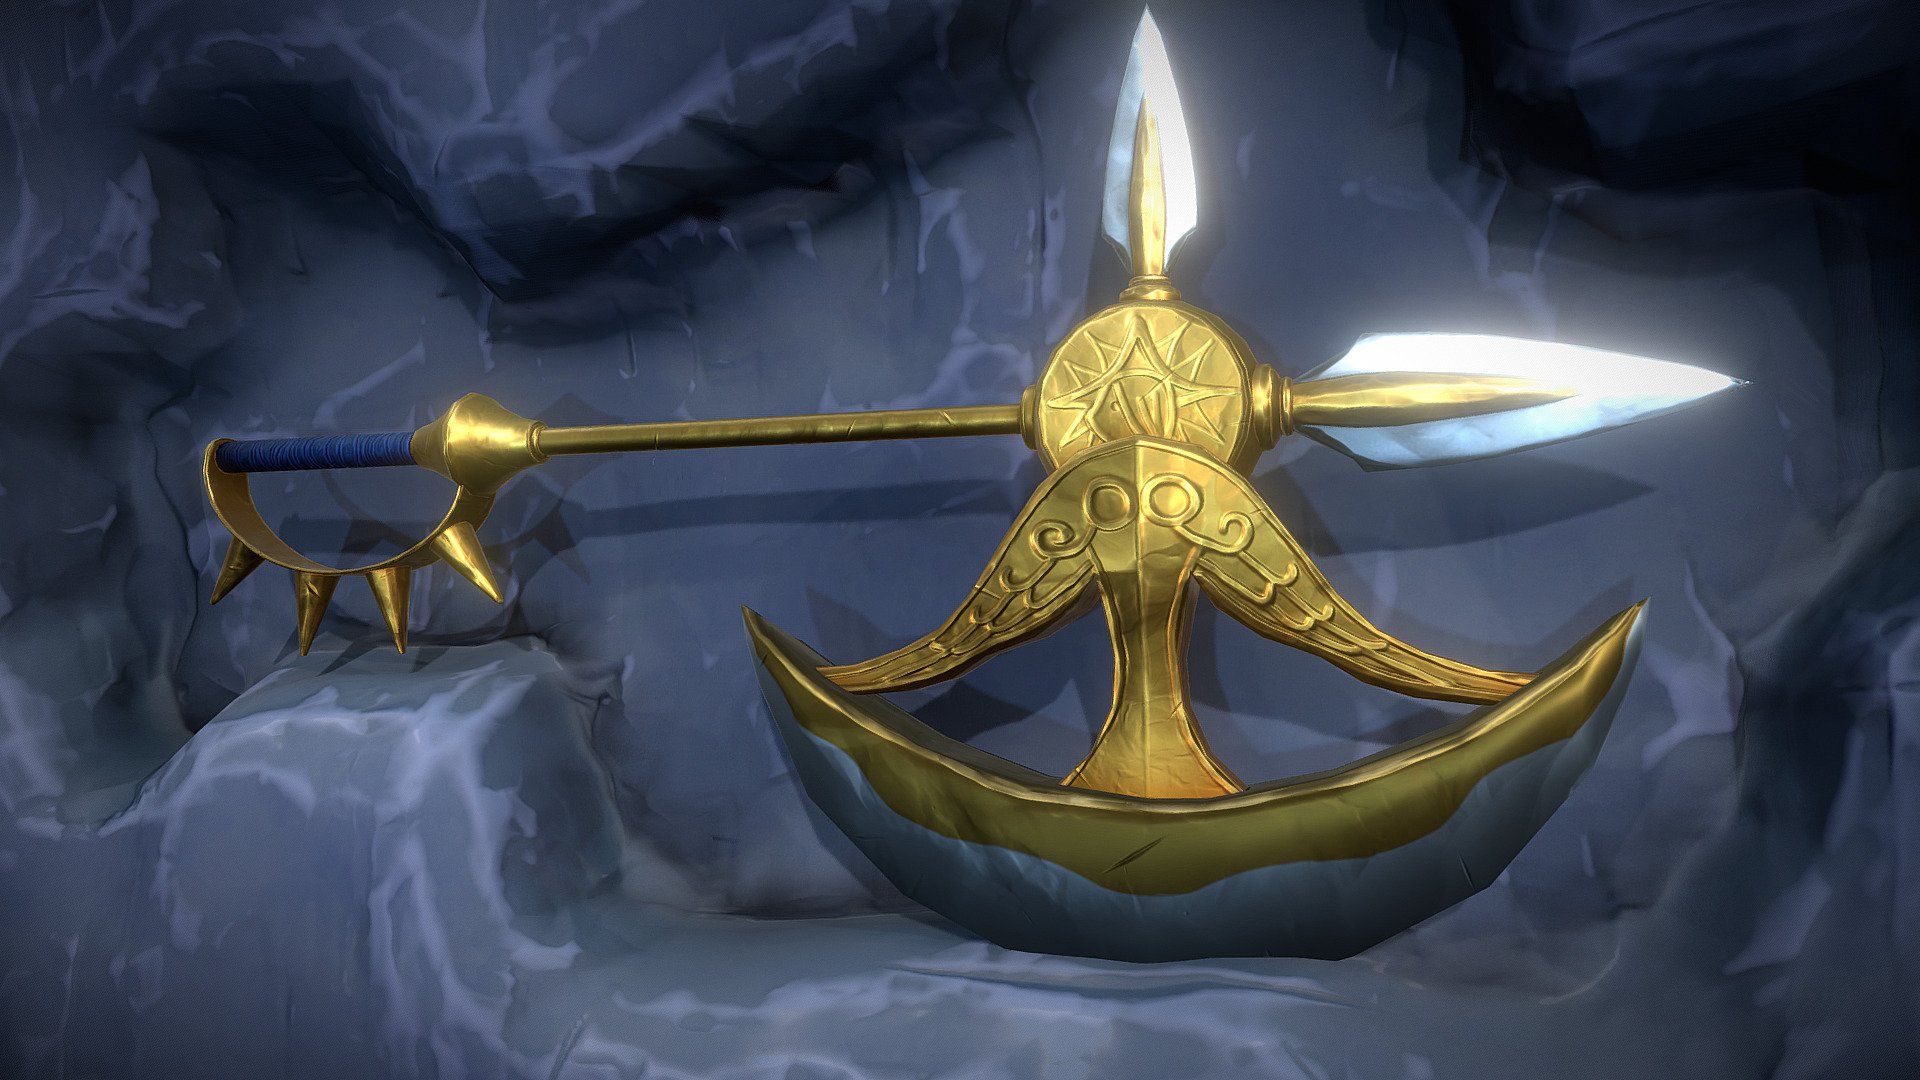 Had a lot of fun sculpting Escanor's axe from the manga/anime Seven Deadly Sins. Wanted to push myself on the sculpting but also the texture work and presentation. Any critique or feedback is always appreciated 3d model